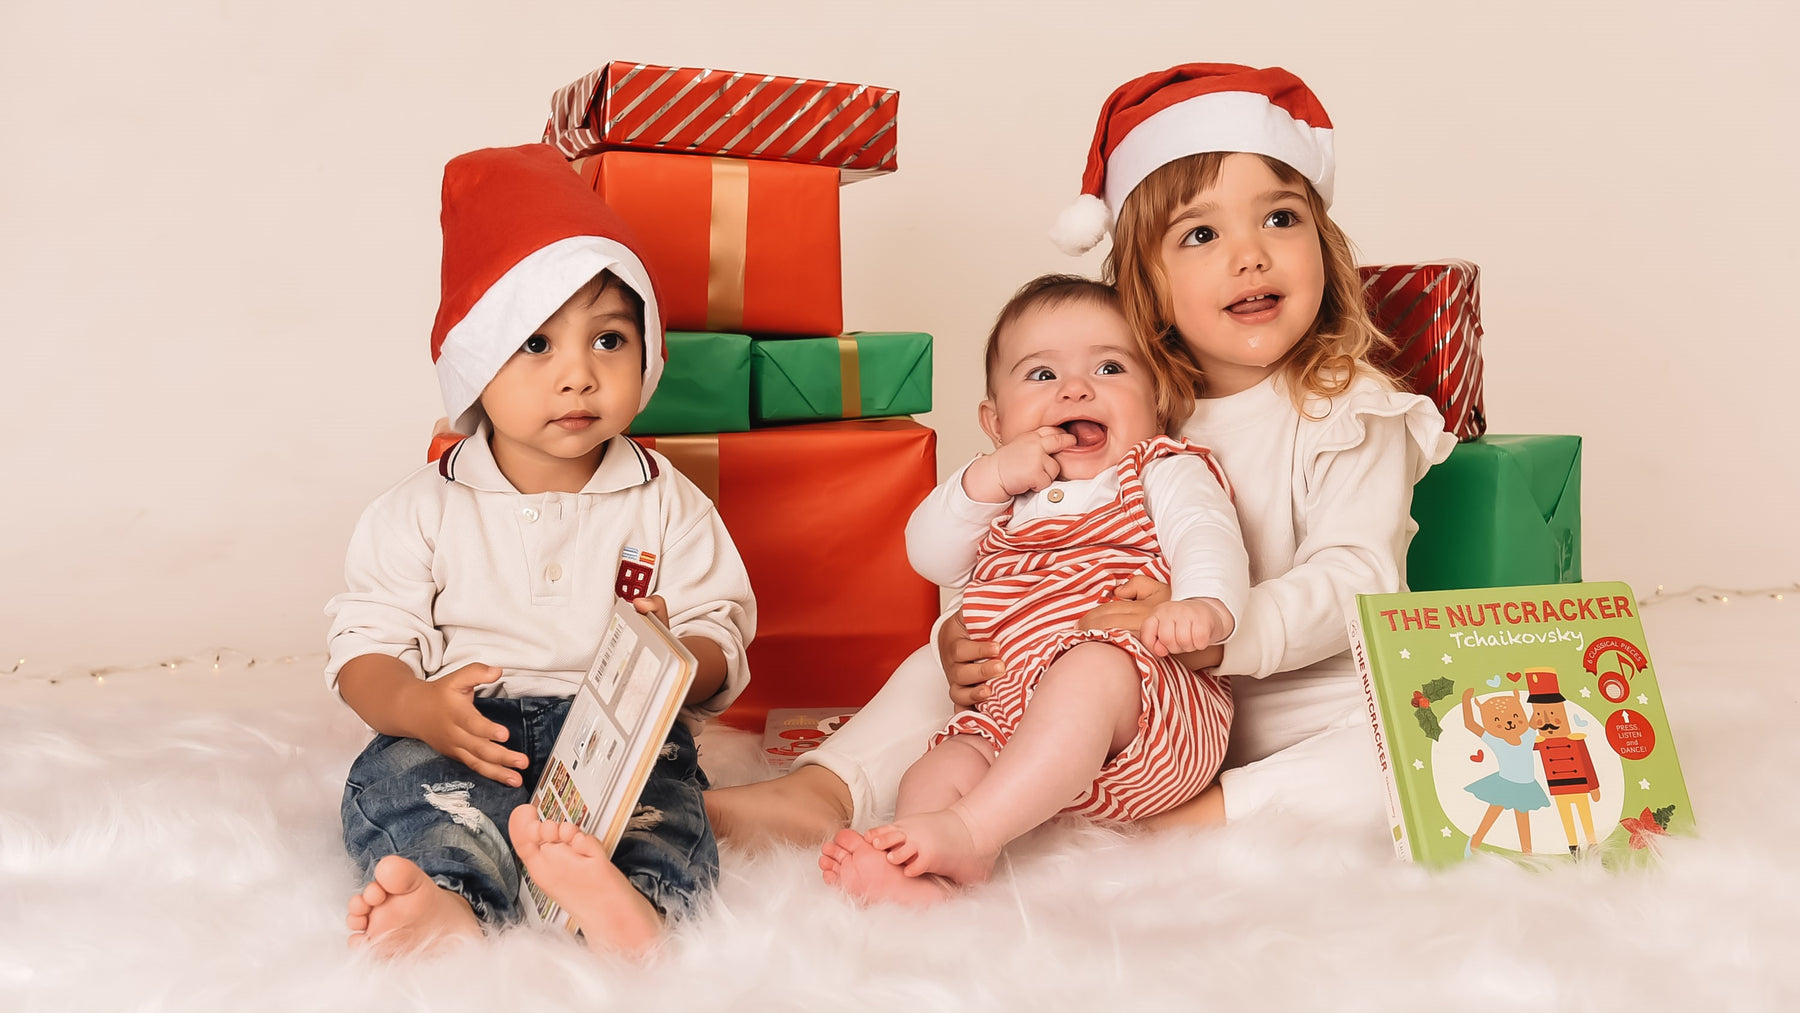 Three kids are posing with Christmas gifts. Fun, educational Christmas gift for kids.